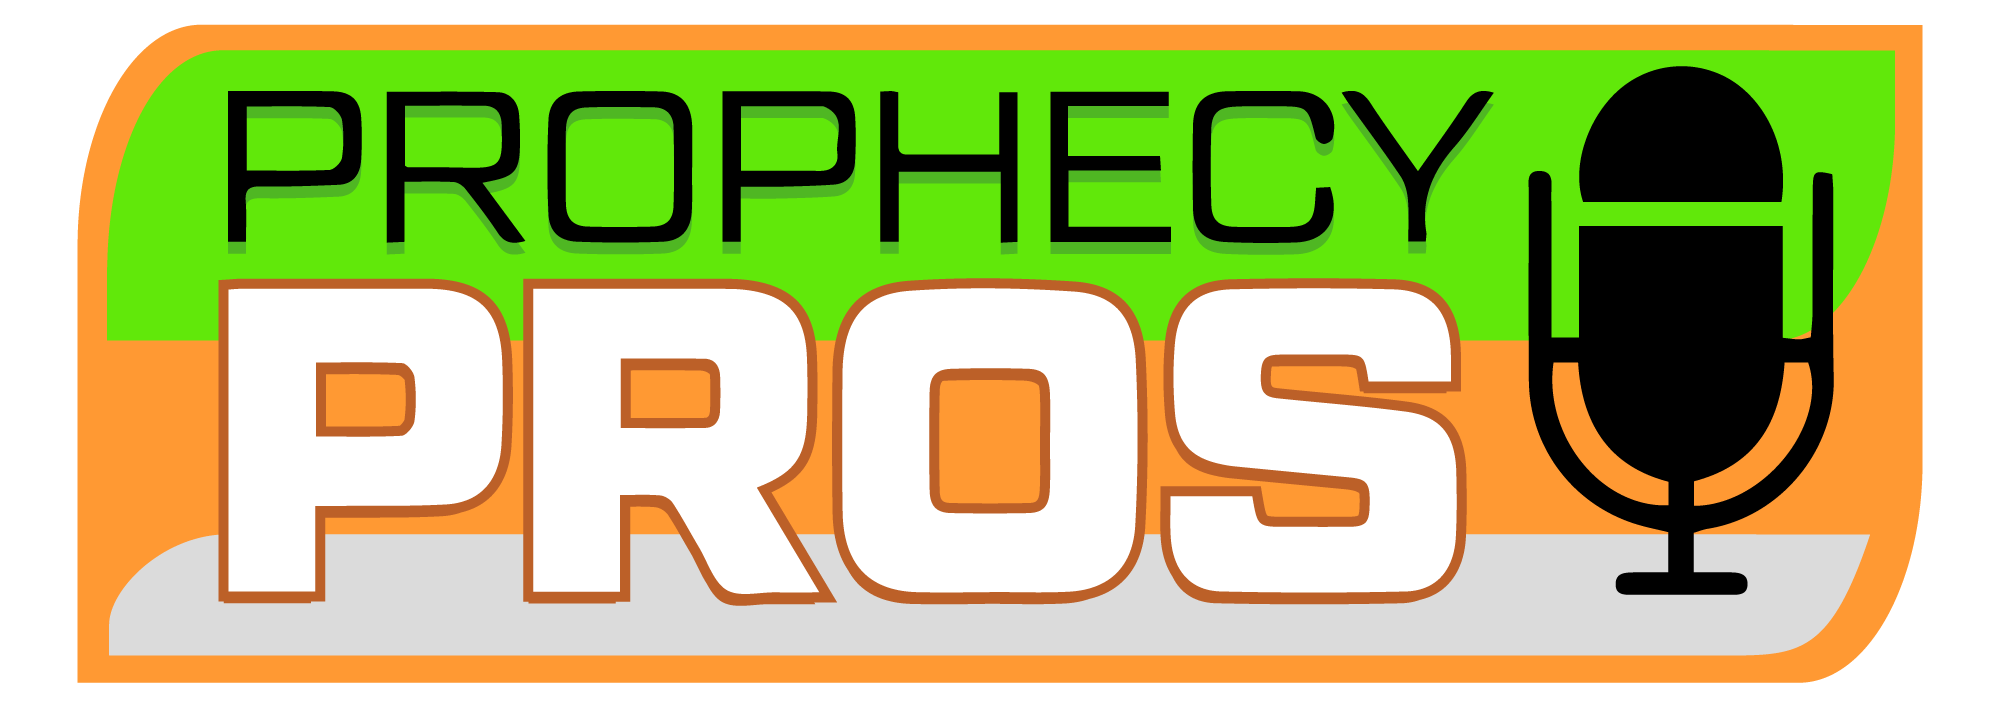 Prophecy Pros Podcast